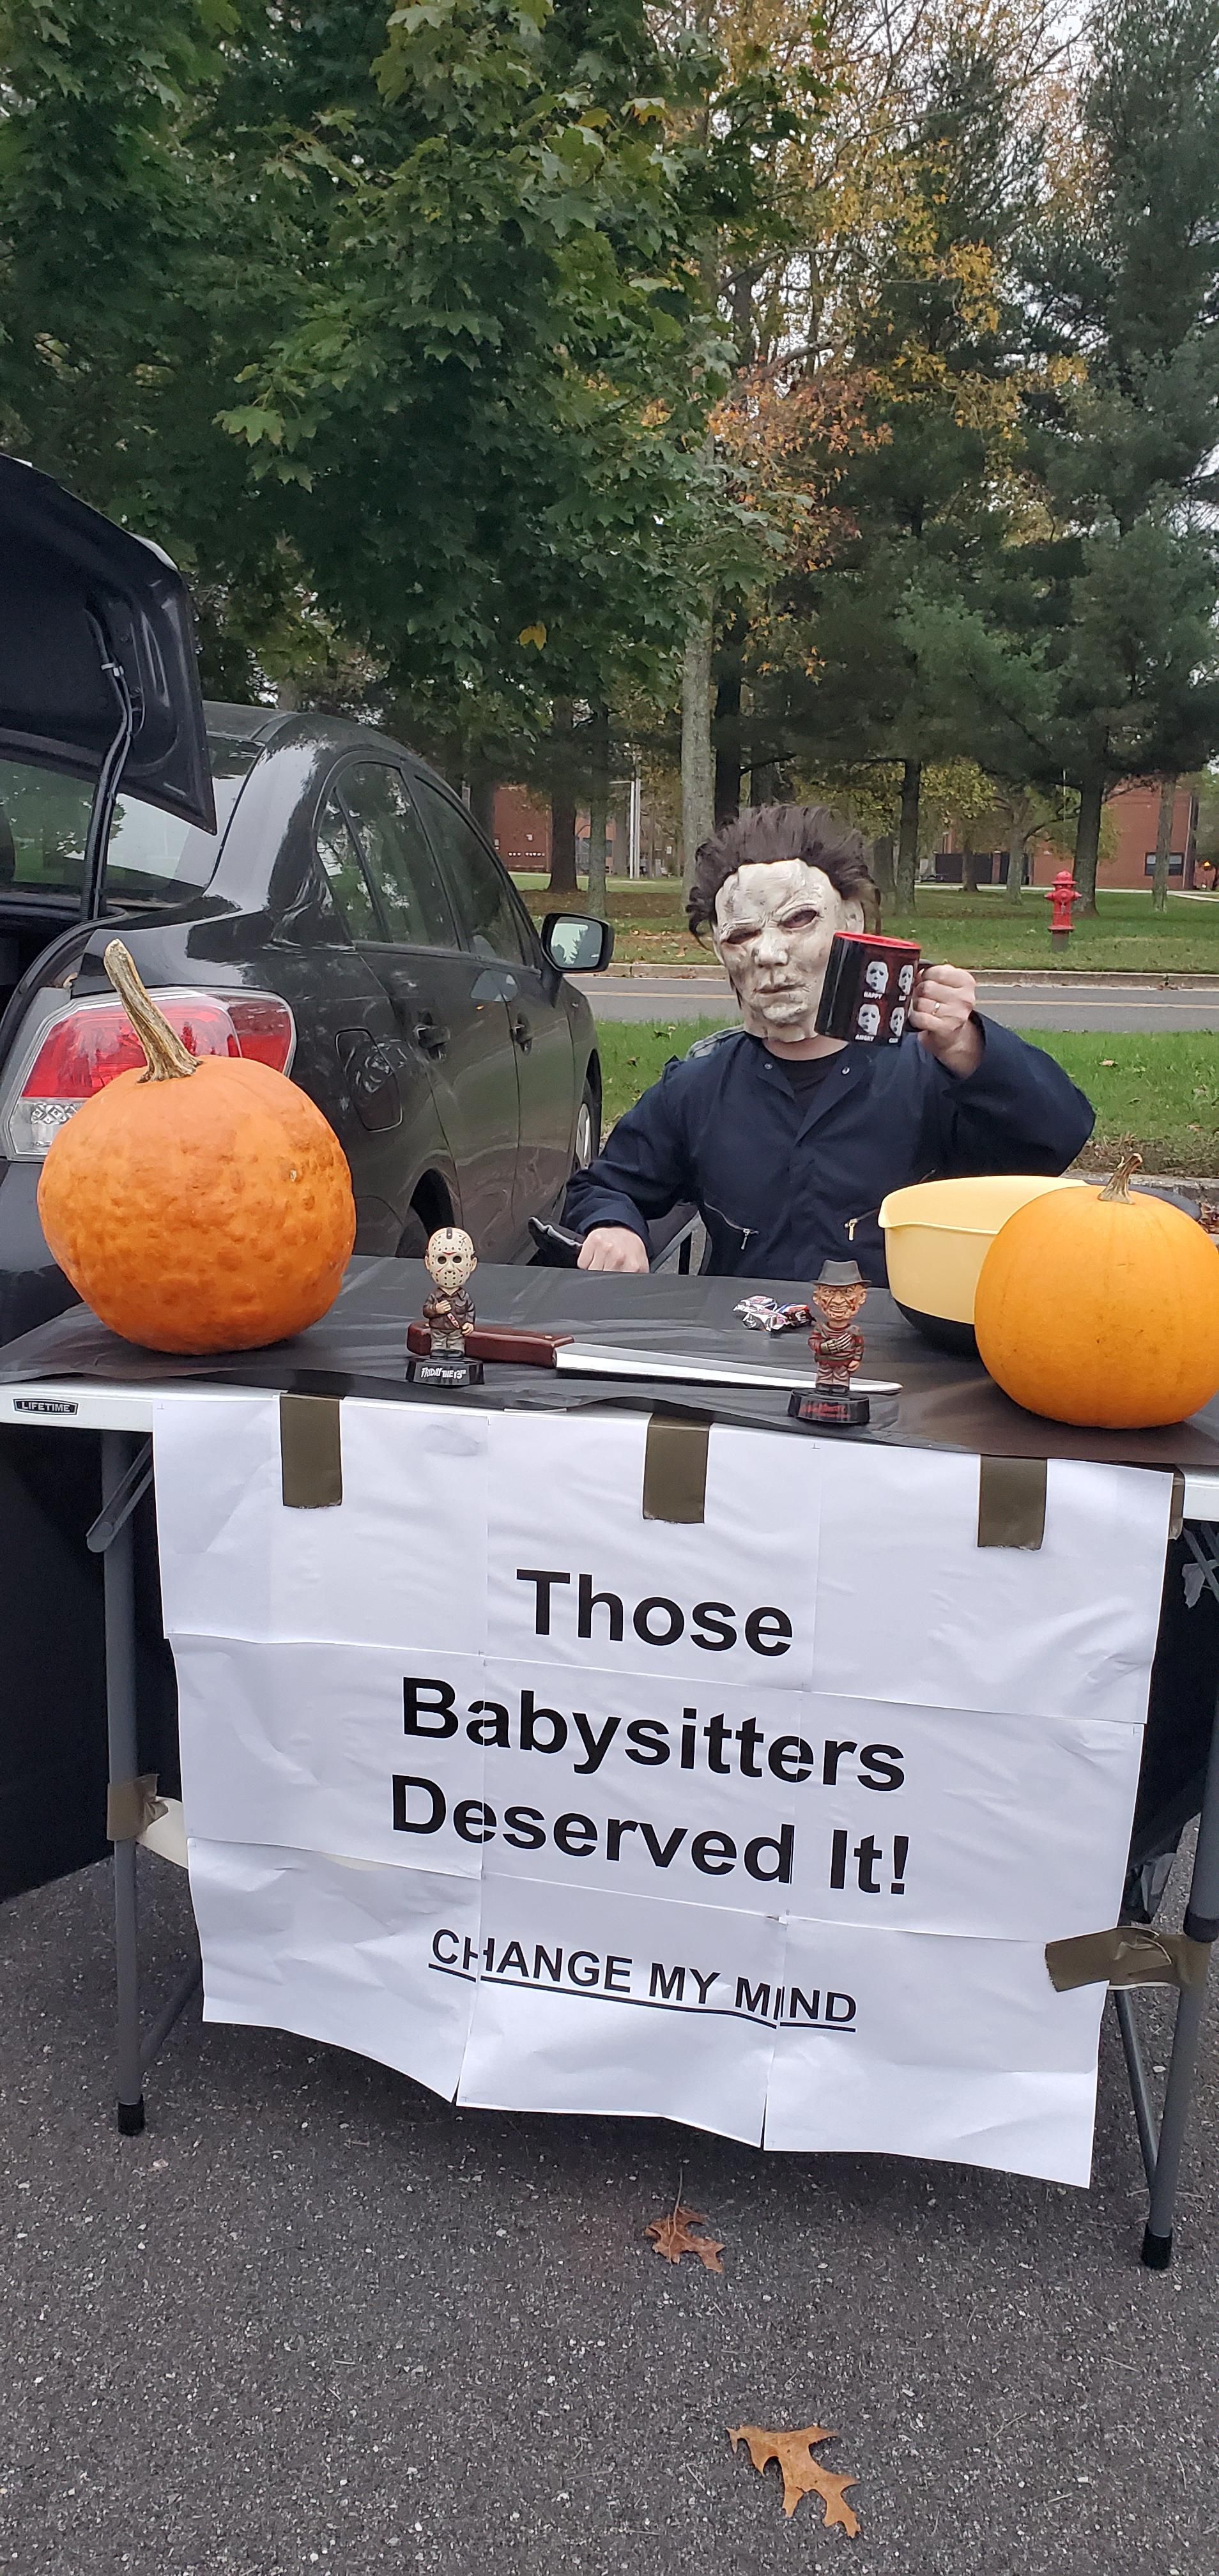 Trunk or treat done right: hilarious, but definitely scarring some children.